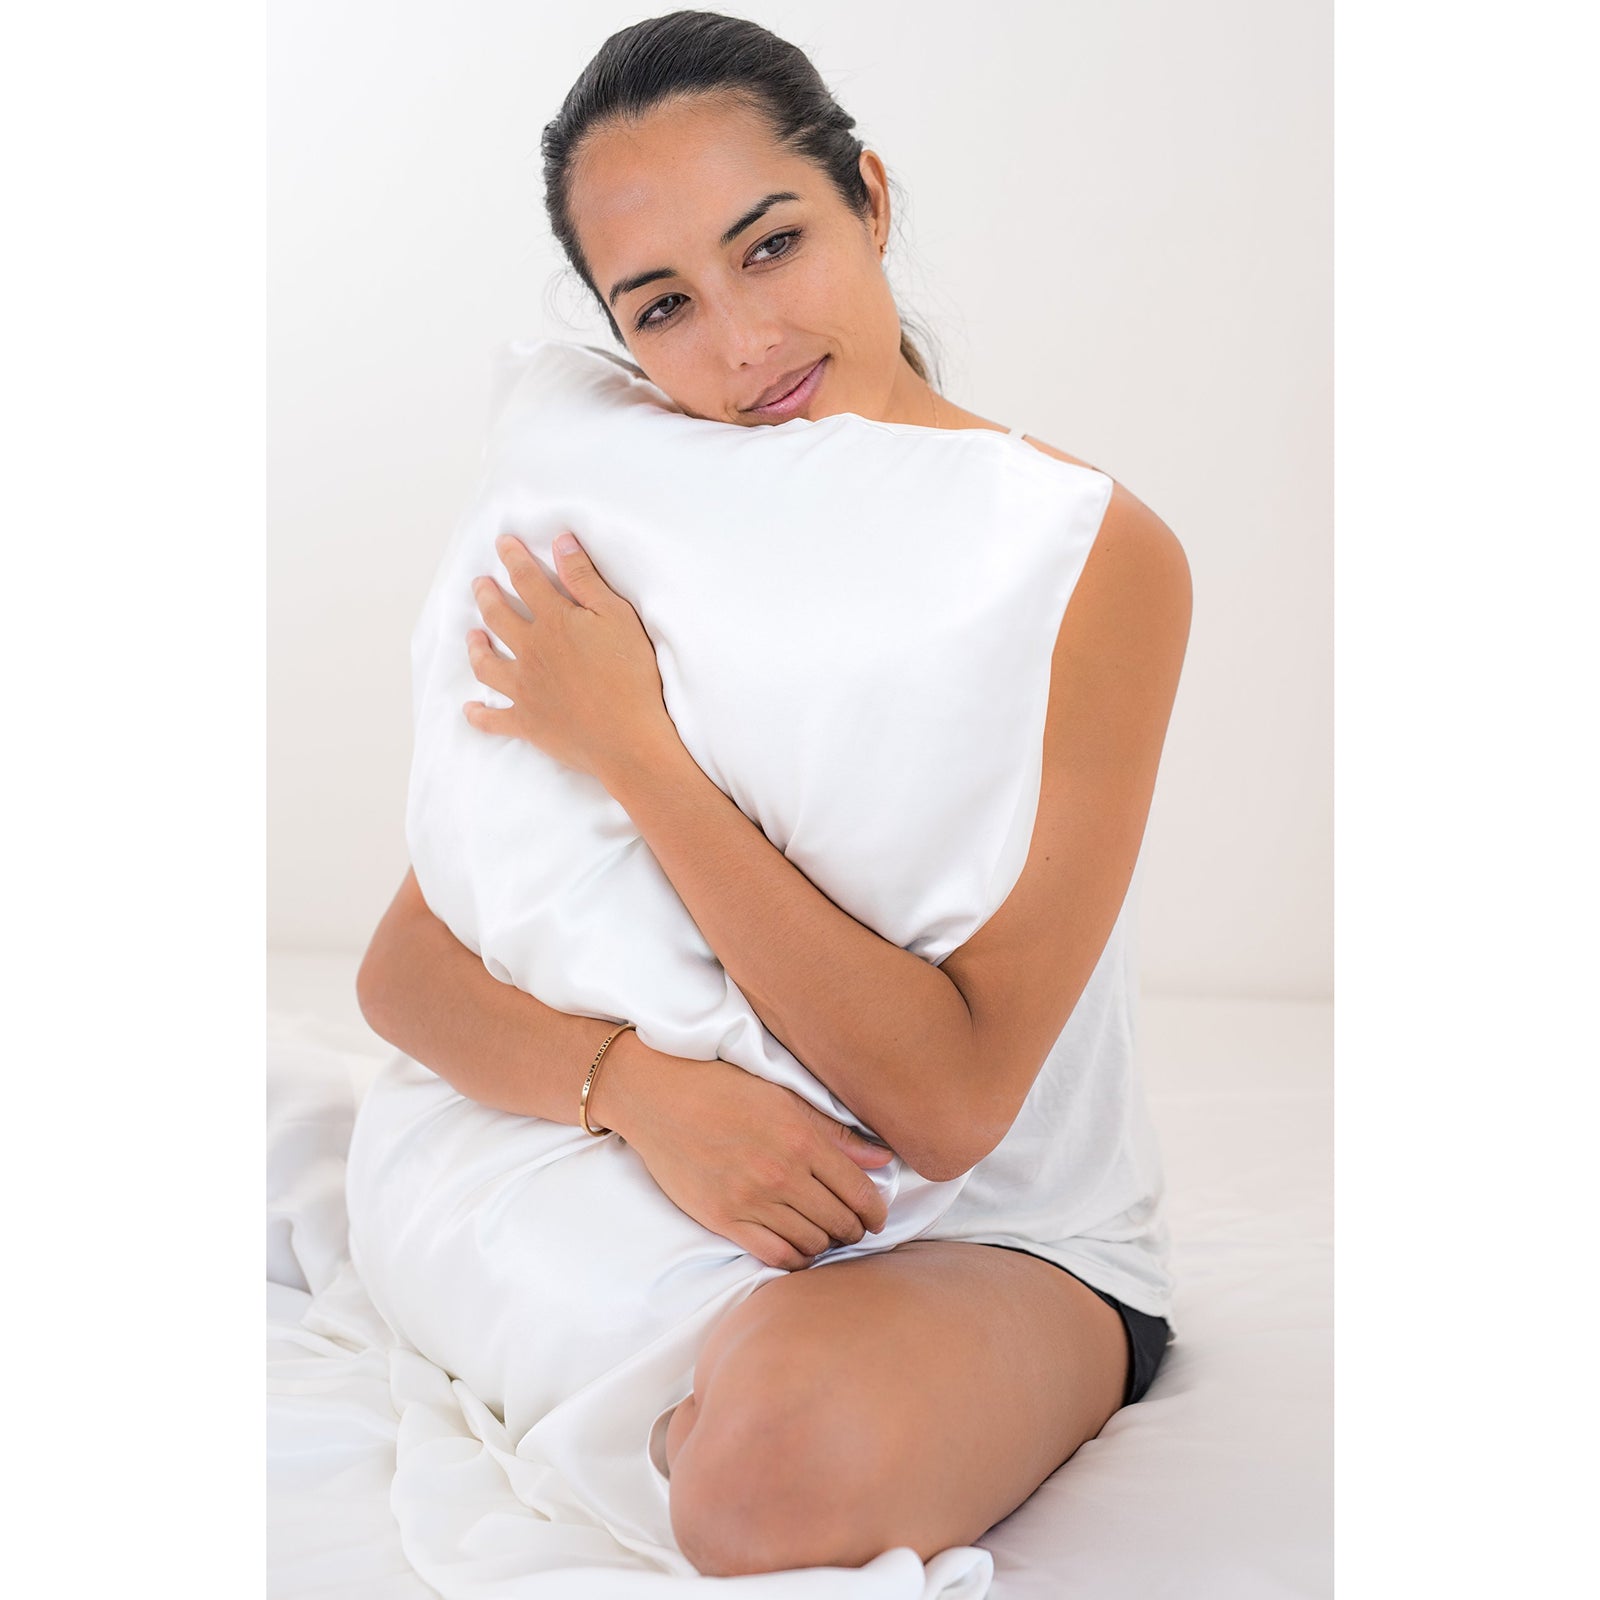 Silk Pillowcase Both Side Silk For Hair And Skin Natural Undyed White  Standard